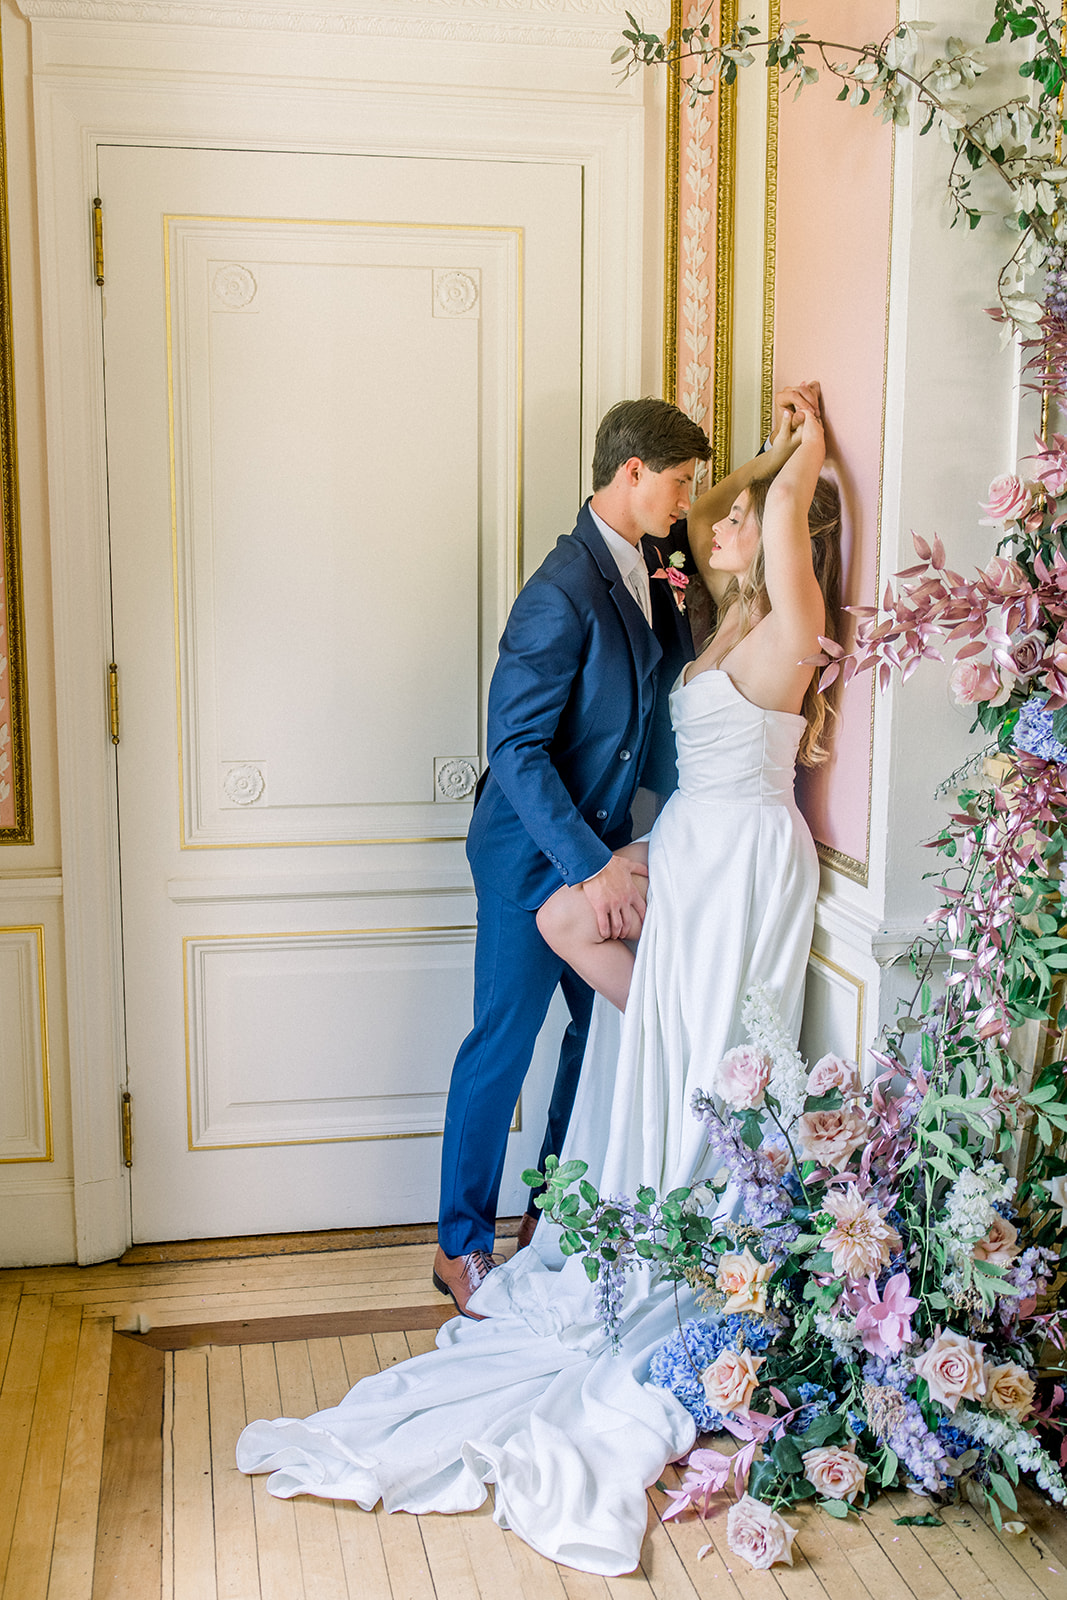 Bride and groom sharing a romantic kiss, showcasing a destination wedding at Cairnwood Estate.